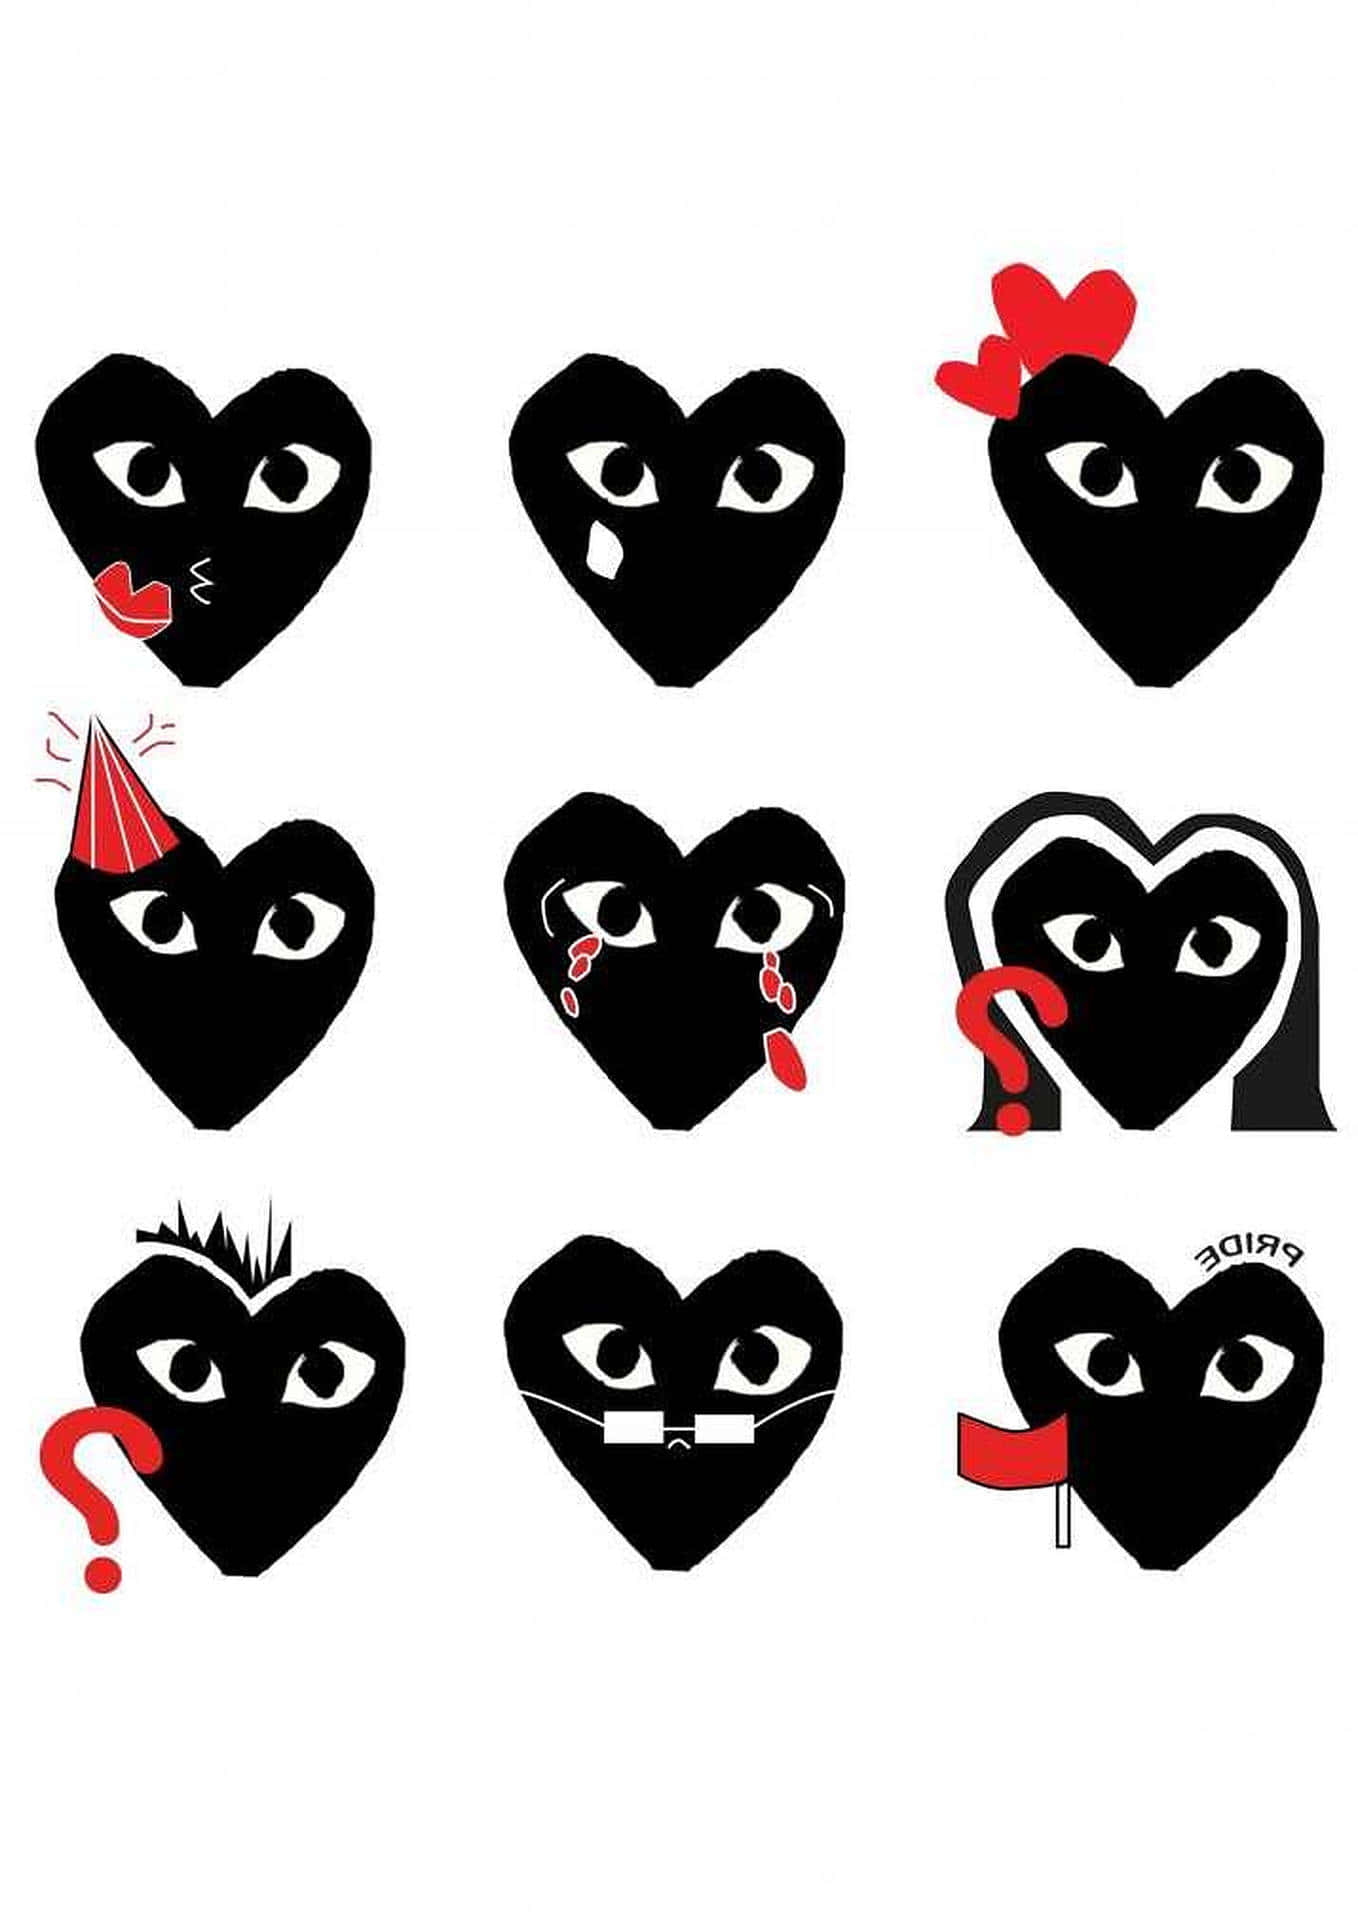 Black Heart Icons With Different Faces